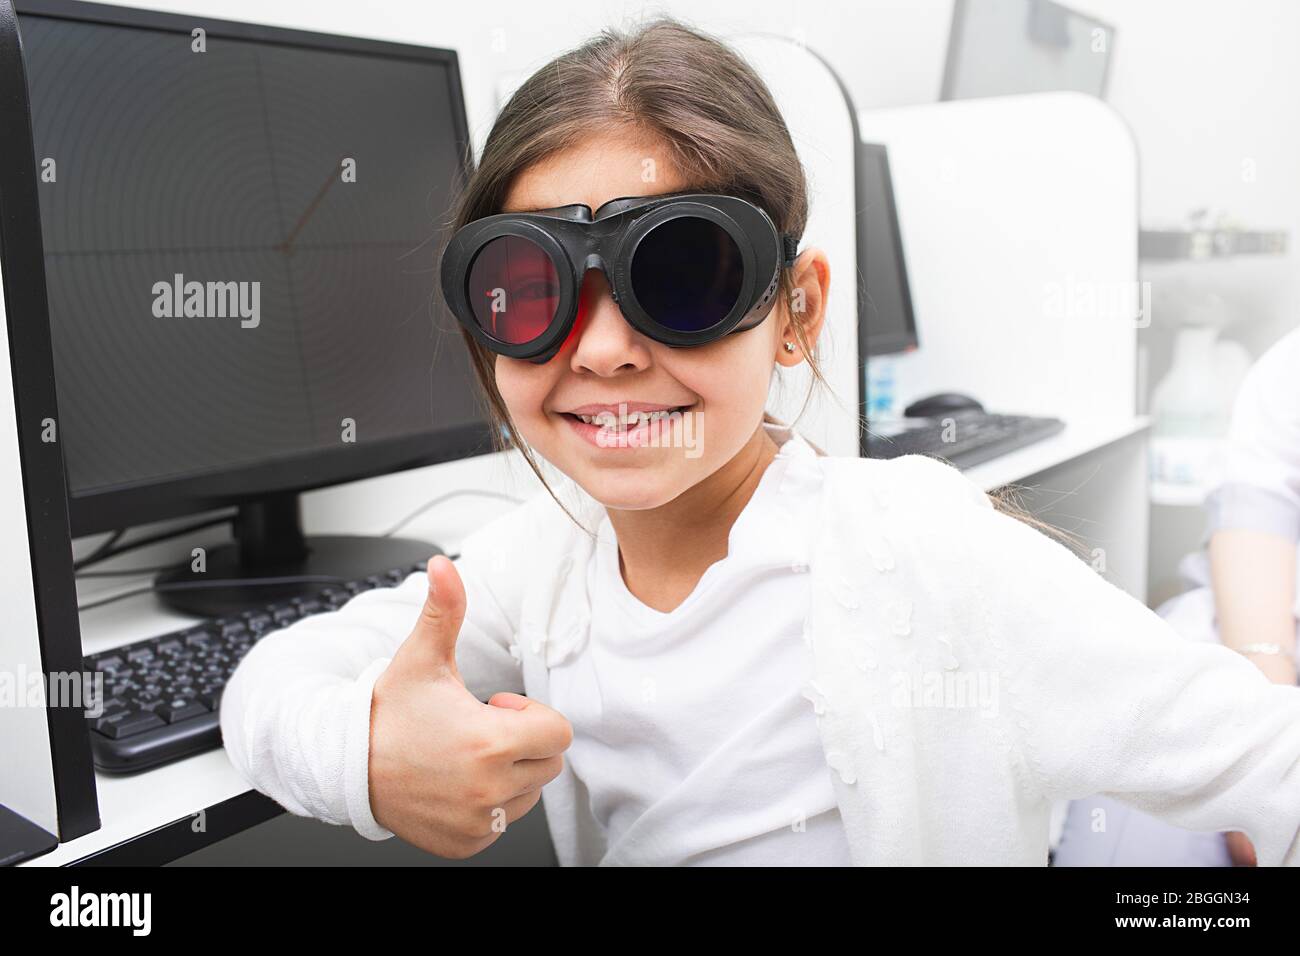 Little girl likes to receive computer treatment for her eyes. Strabismus treatment. Amblyopia treatment. Stock Photo